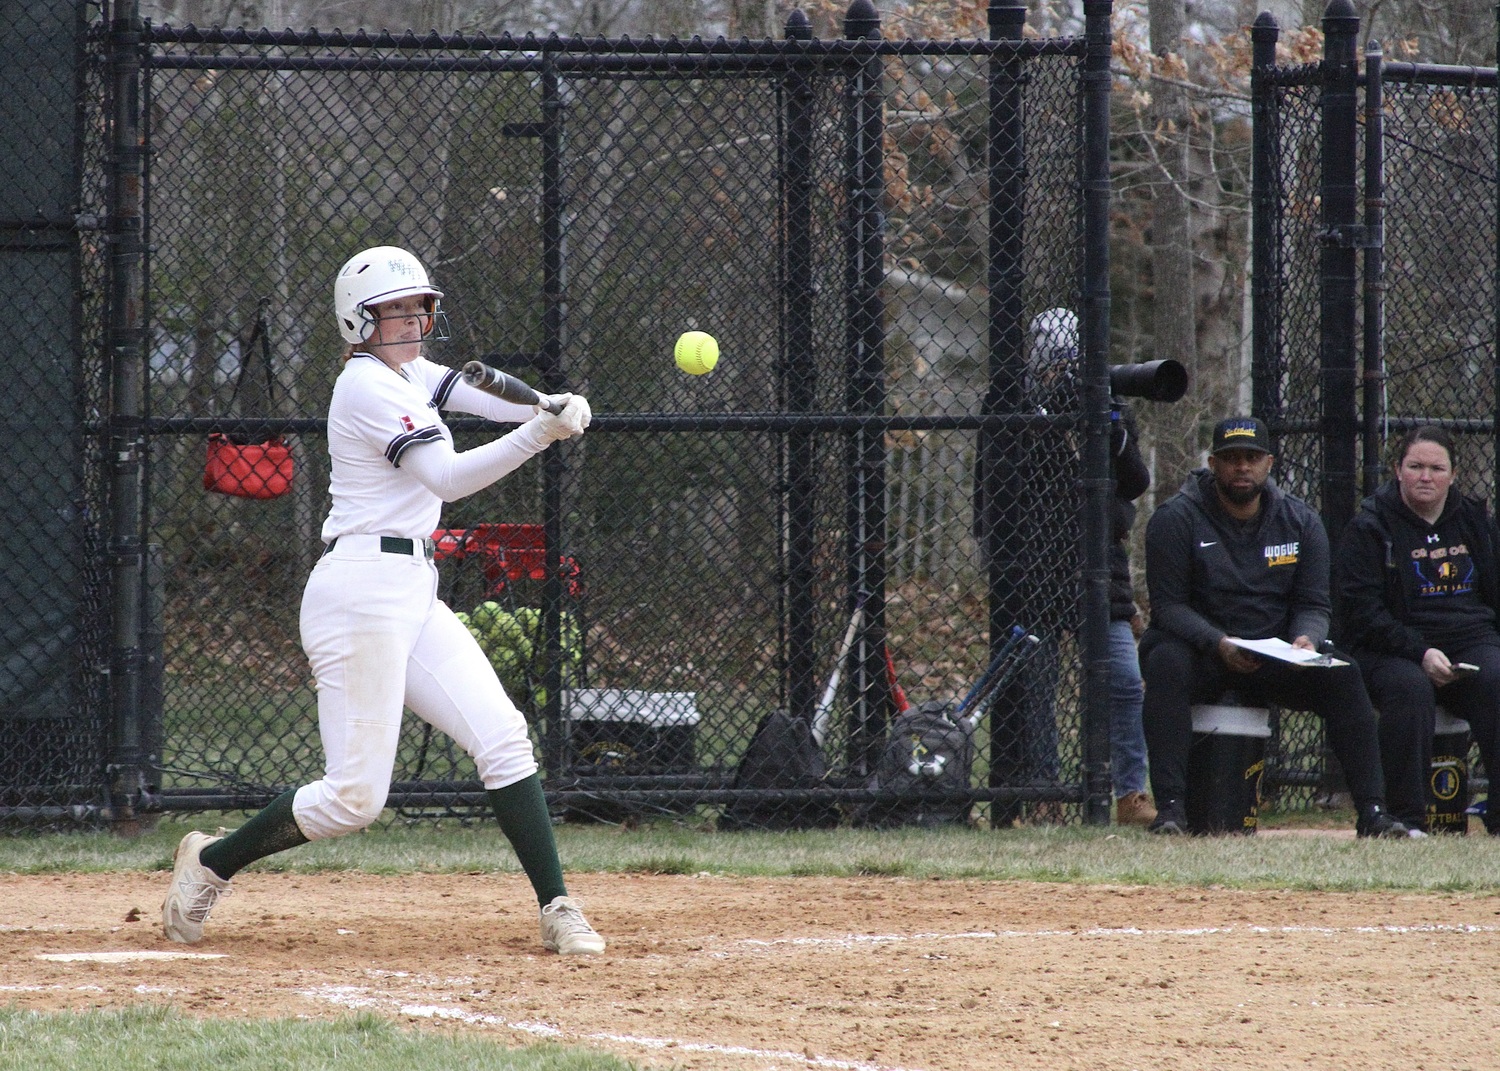 Sophomore third baseman Katie Burke connects with a pitch. DESIRÉE KEEGAN